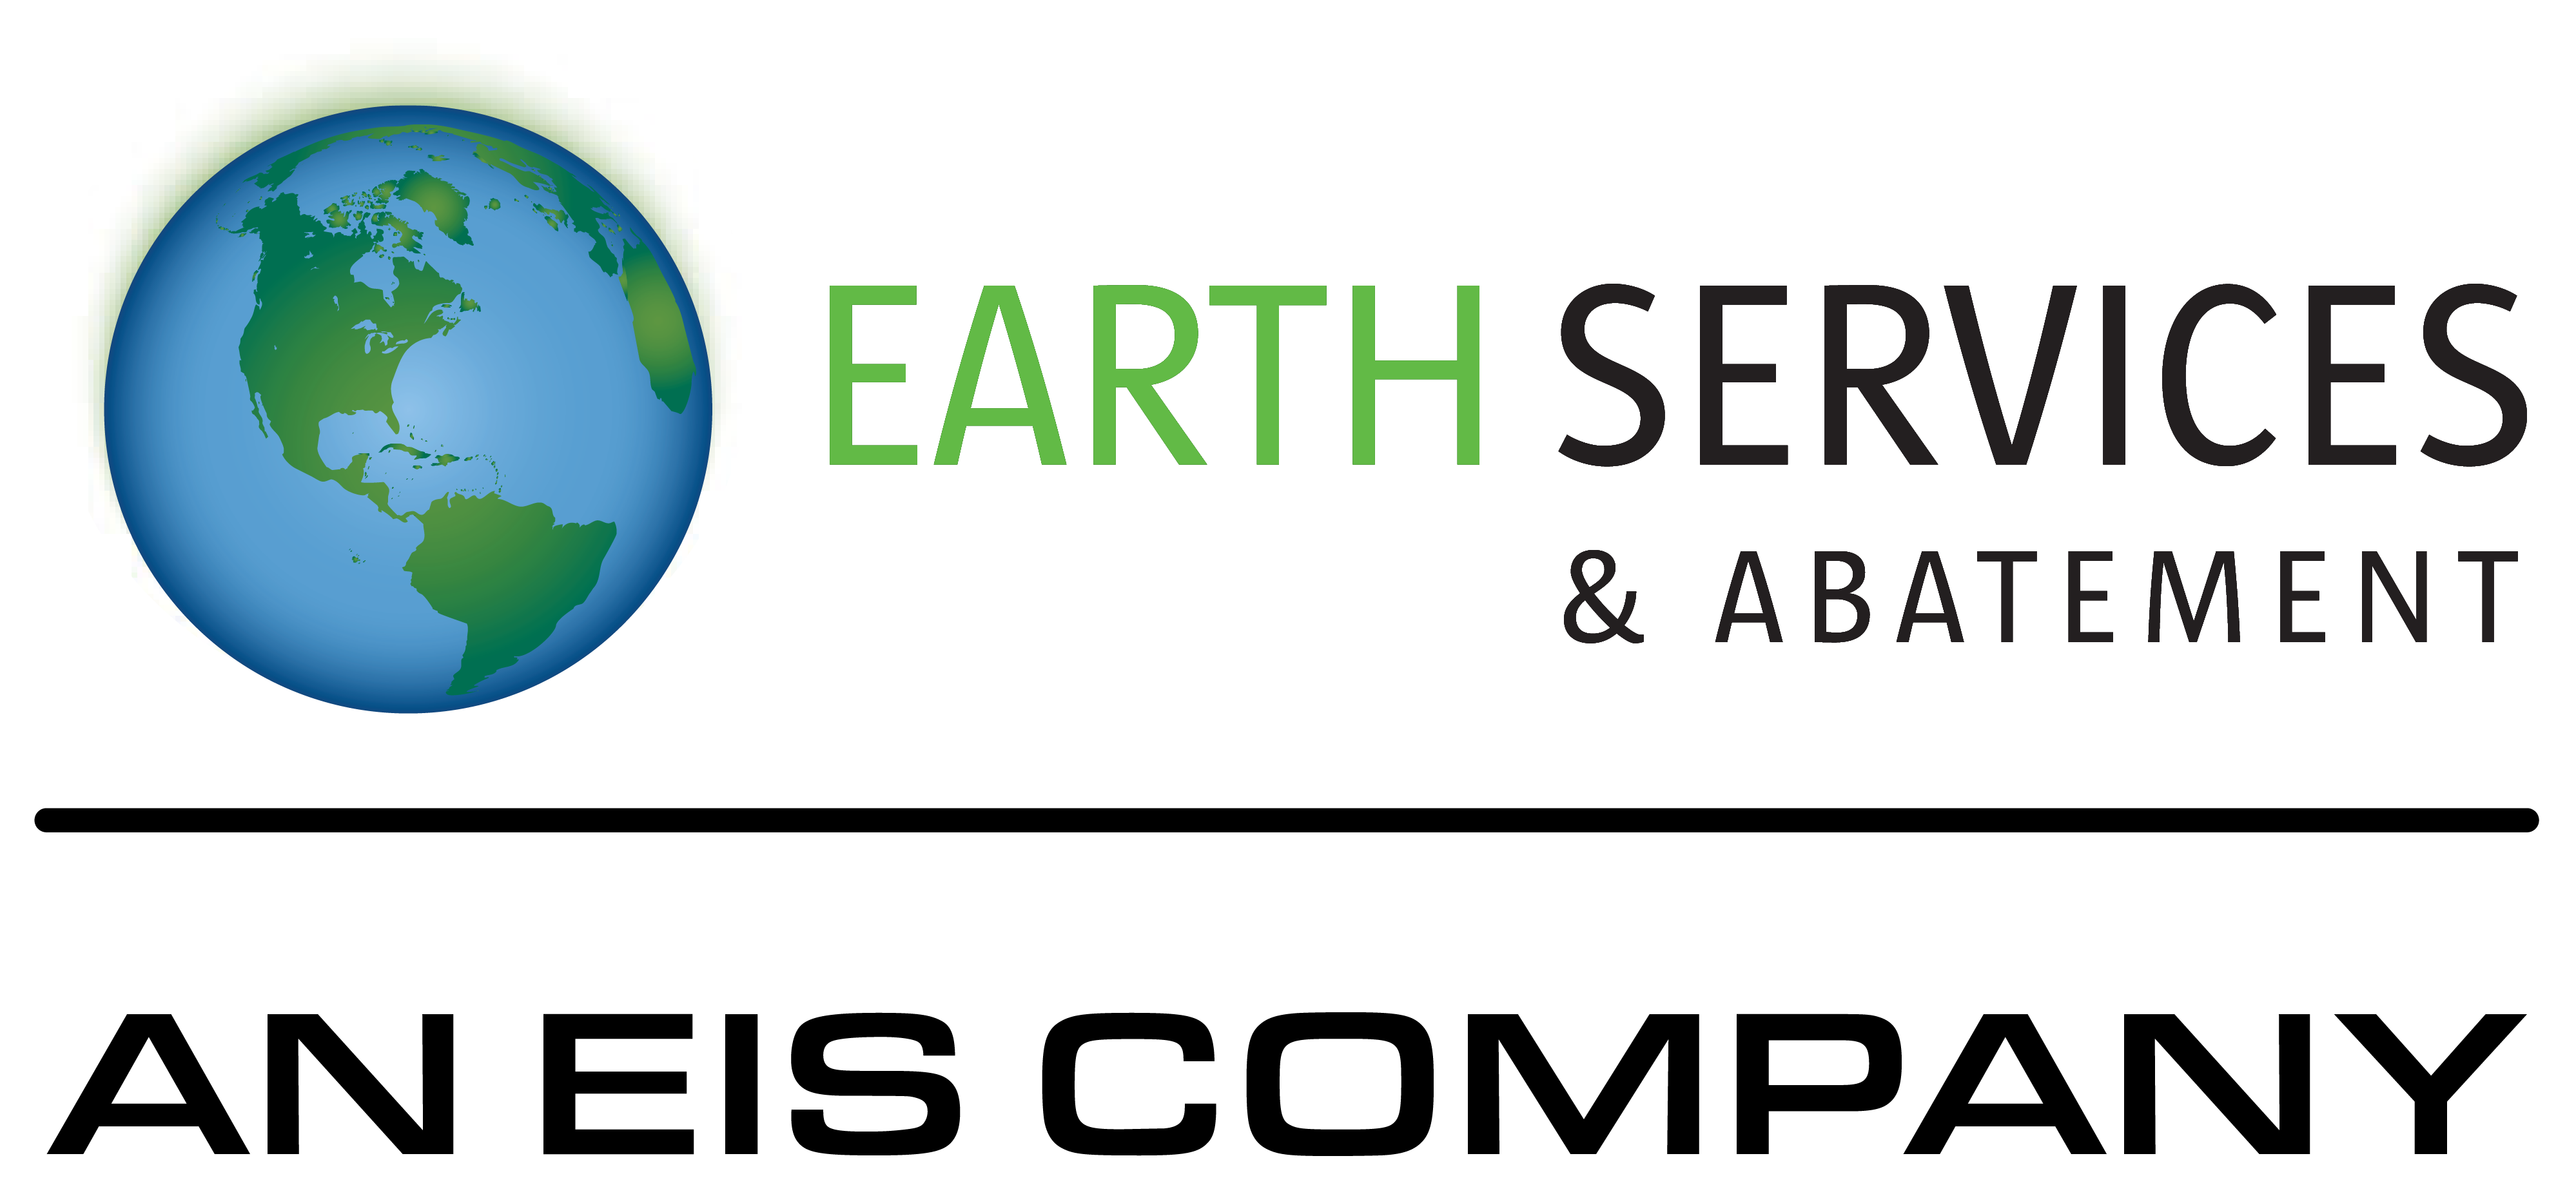 Earth Services & Abatement Logo